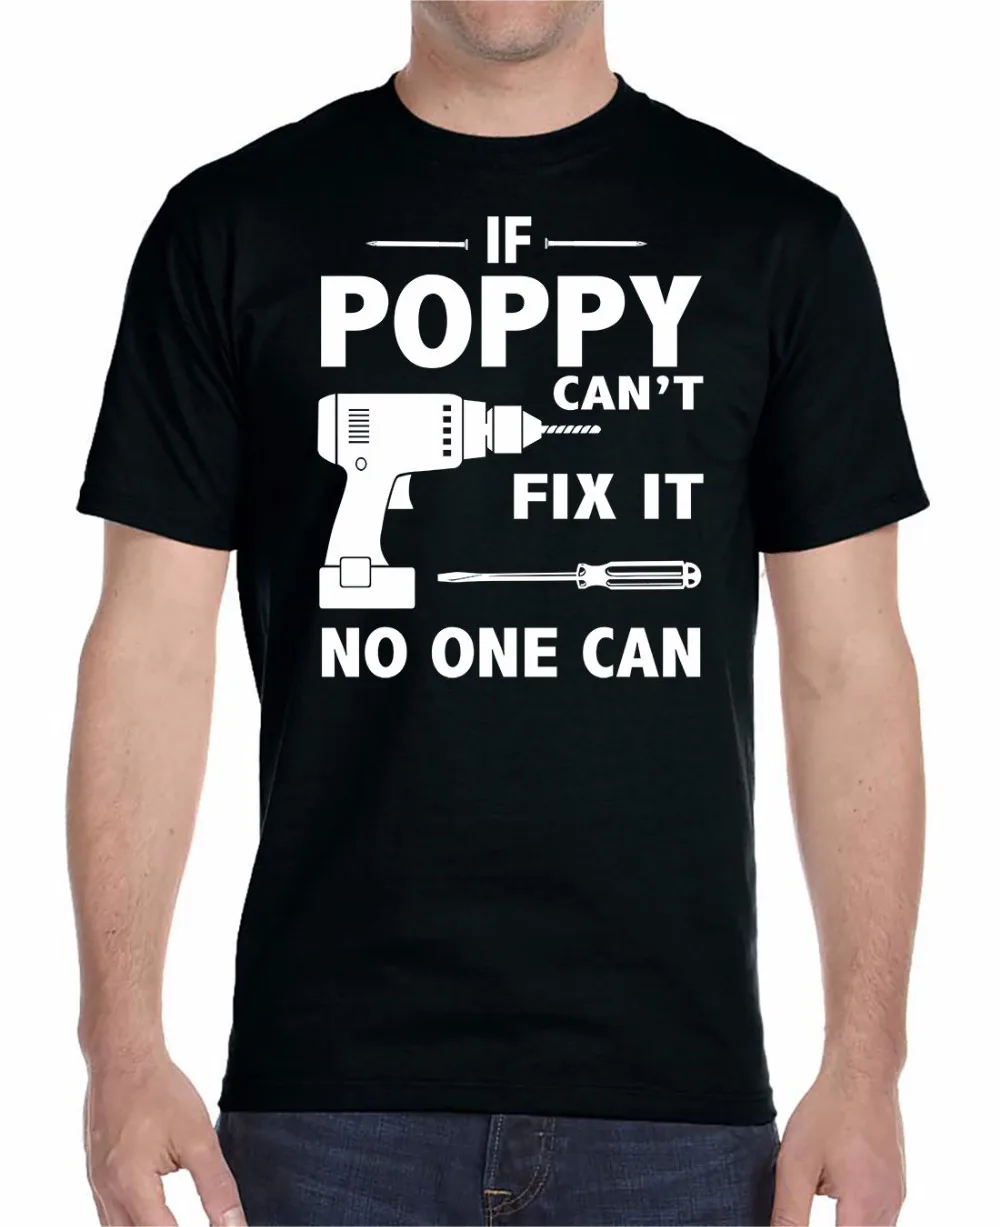 

T-Shirt Brand 2018 Male Short Sleeve Print Tee Shirts If Poppy Can'T Fix It No One Can Popular Style Man T-Shirt